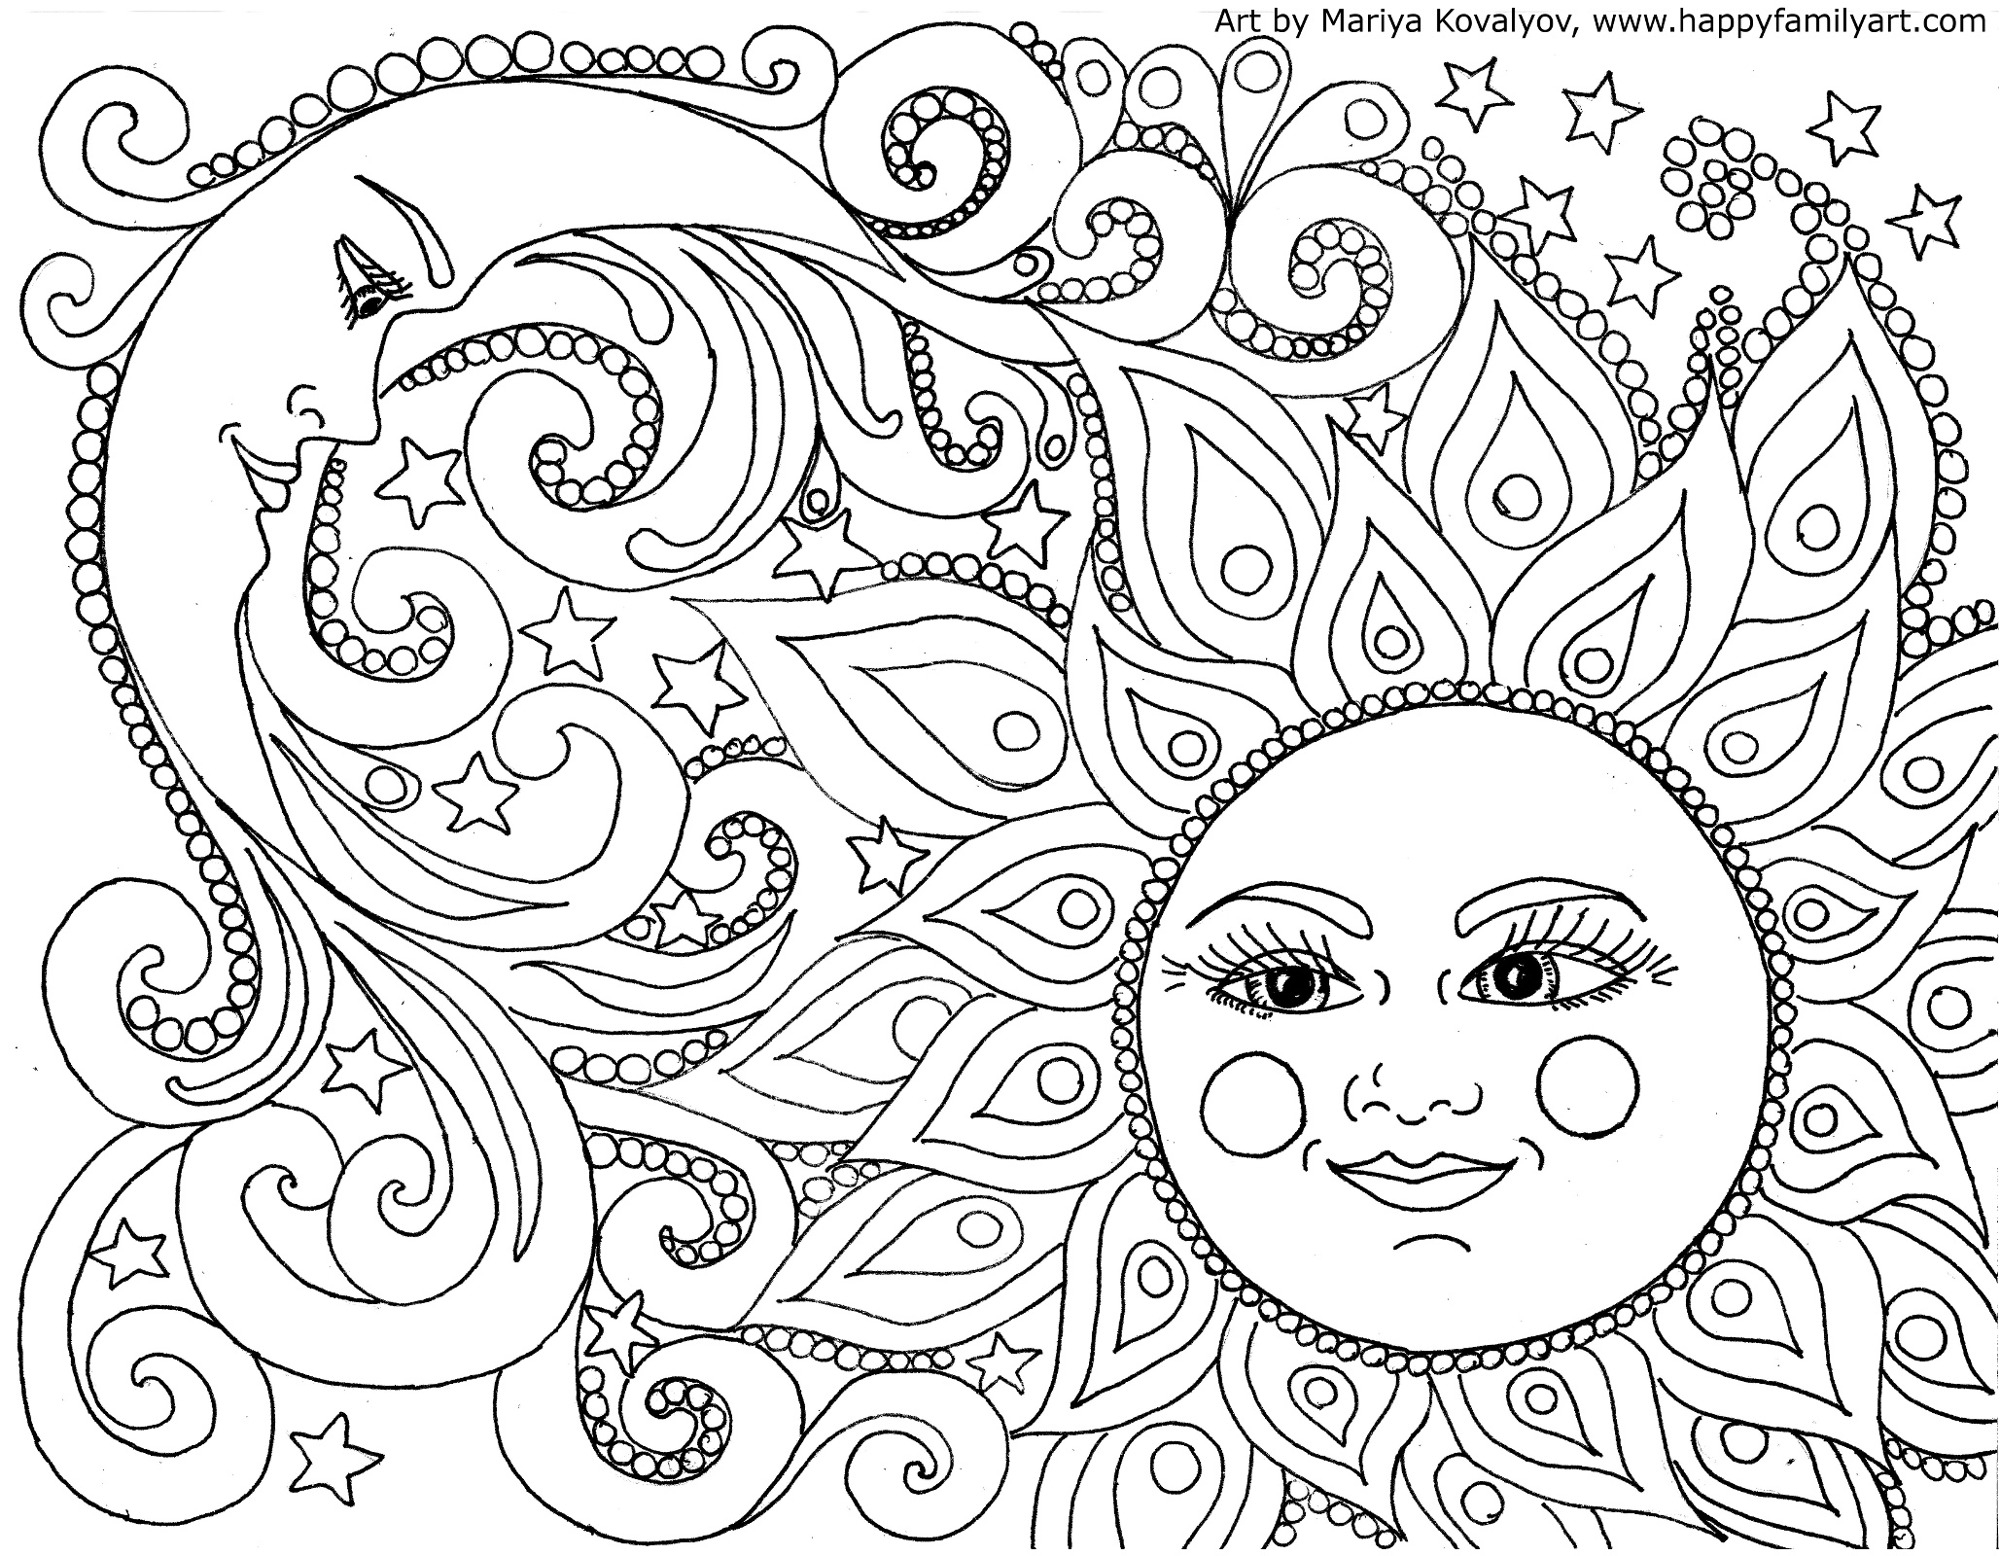 Art Coloring Pages For Adults Happy Family Art Original And Fun Coloring Pages